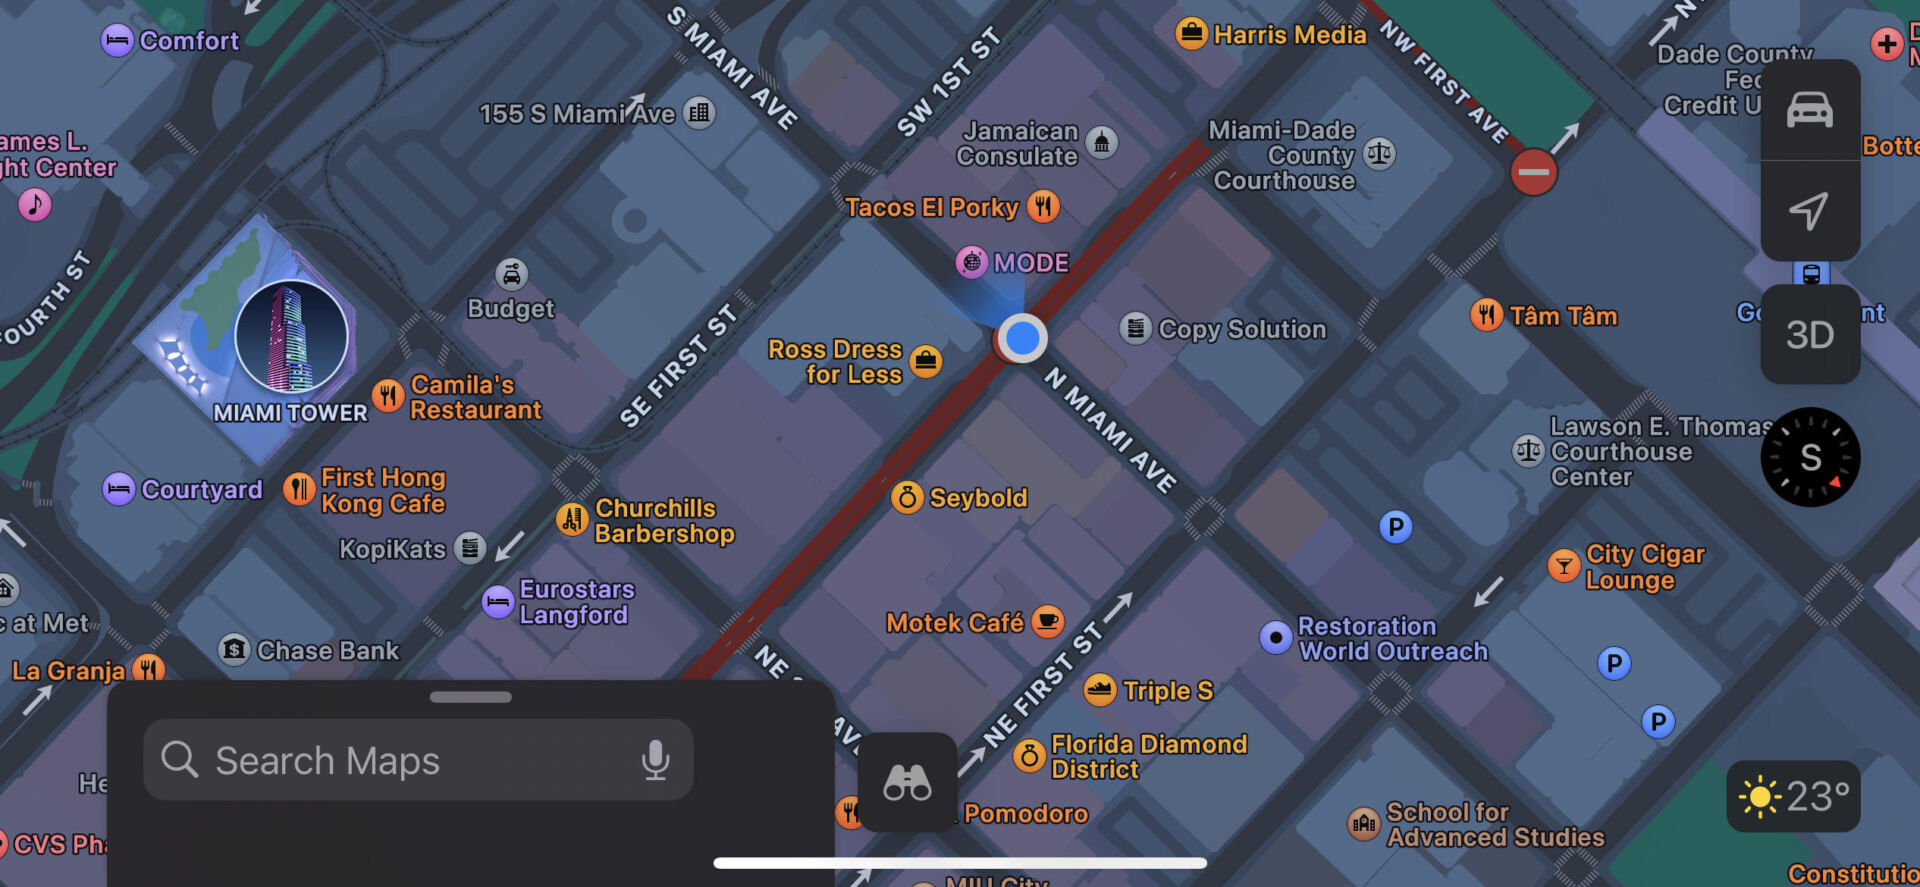 GPS Location updated to Miami in Maps App